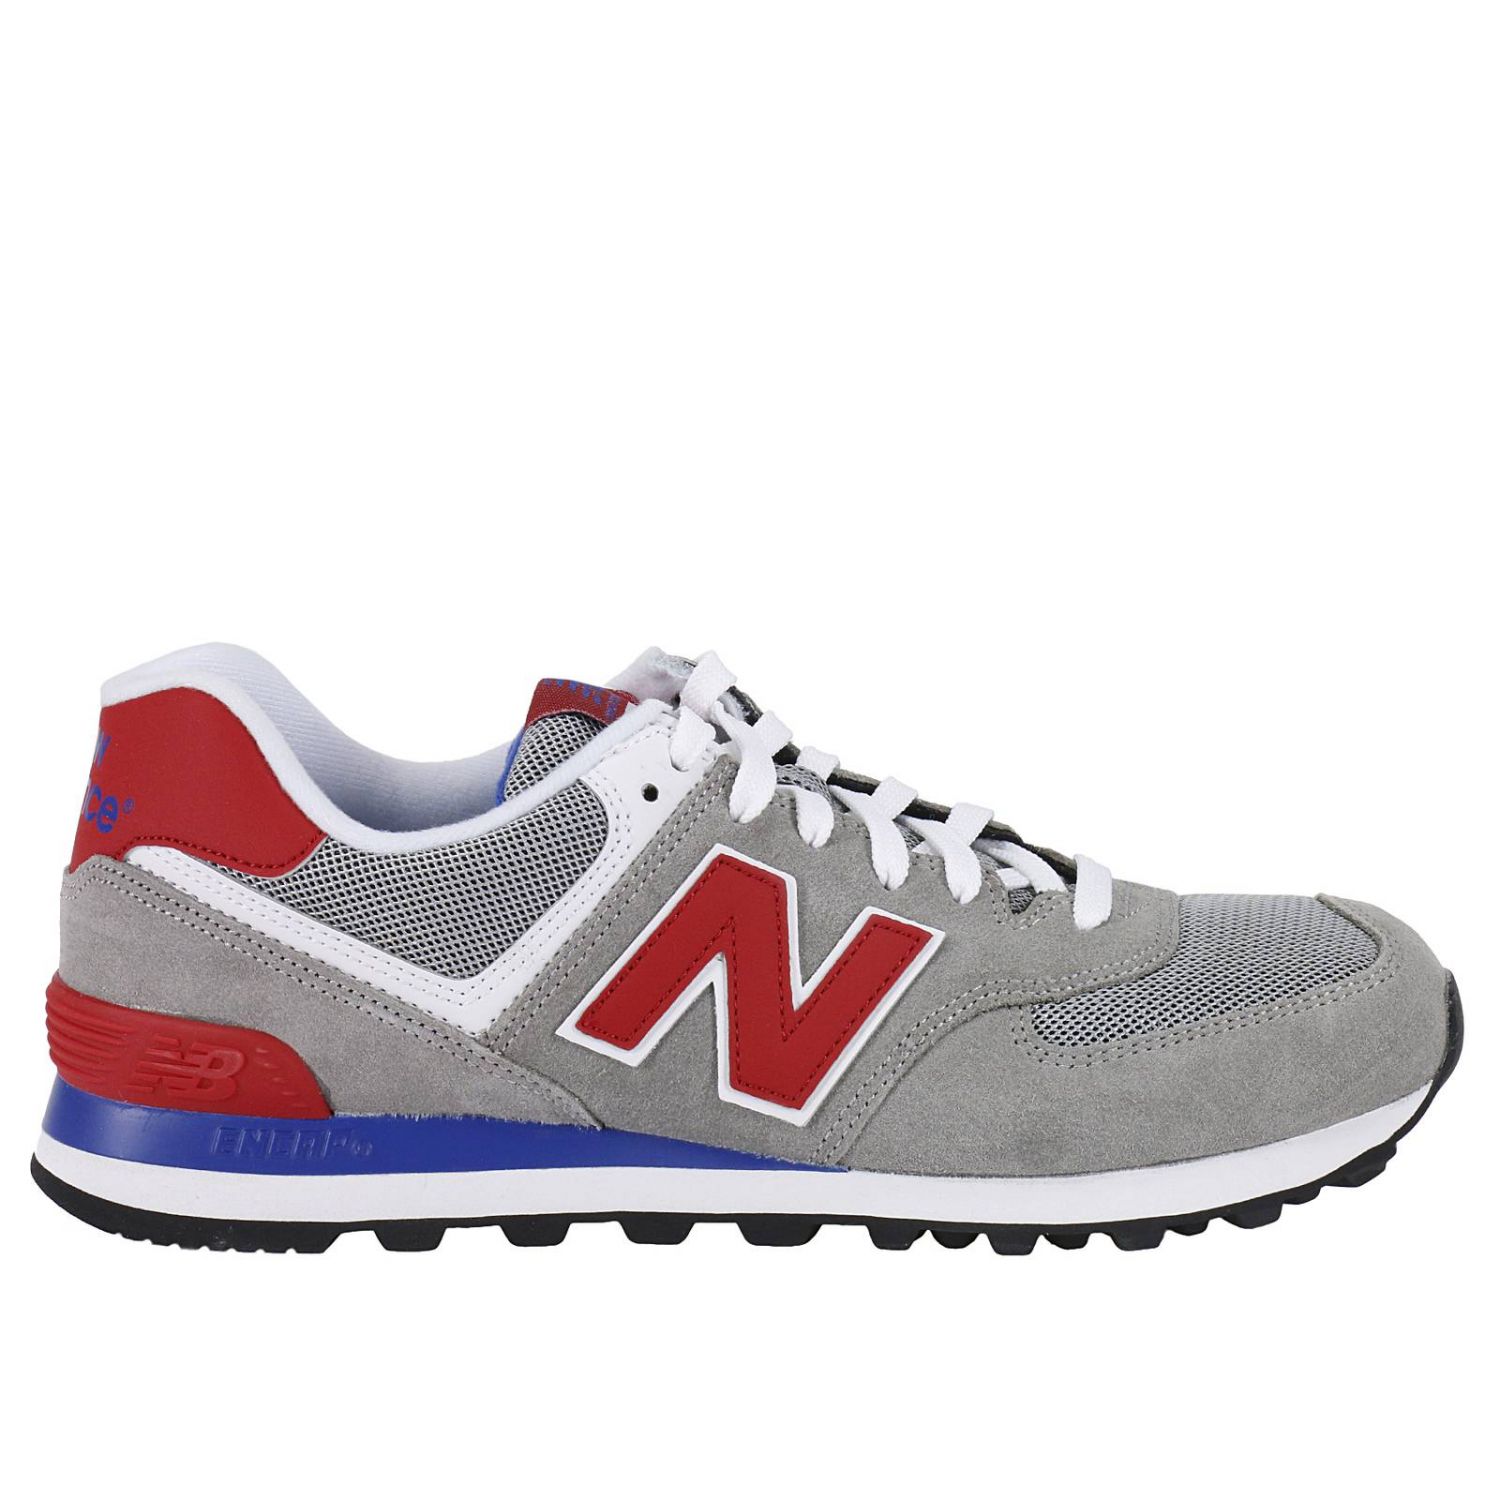 New Balance Outlet: Shoes men | Sneakers New Balance Men Ice | Sneakers ...